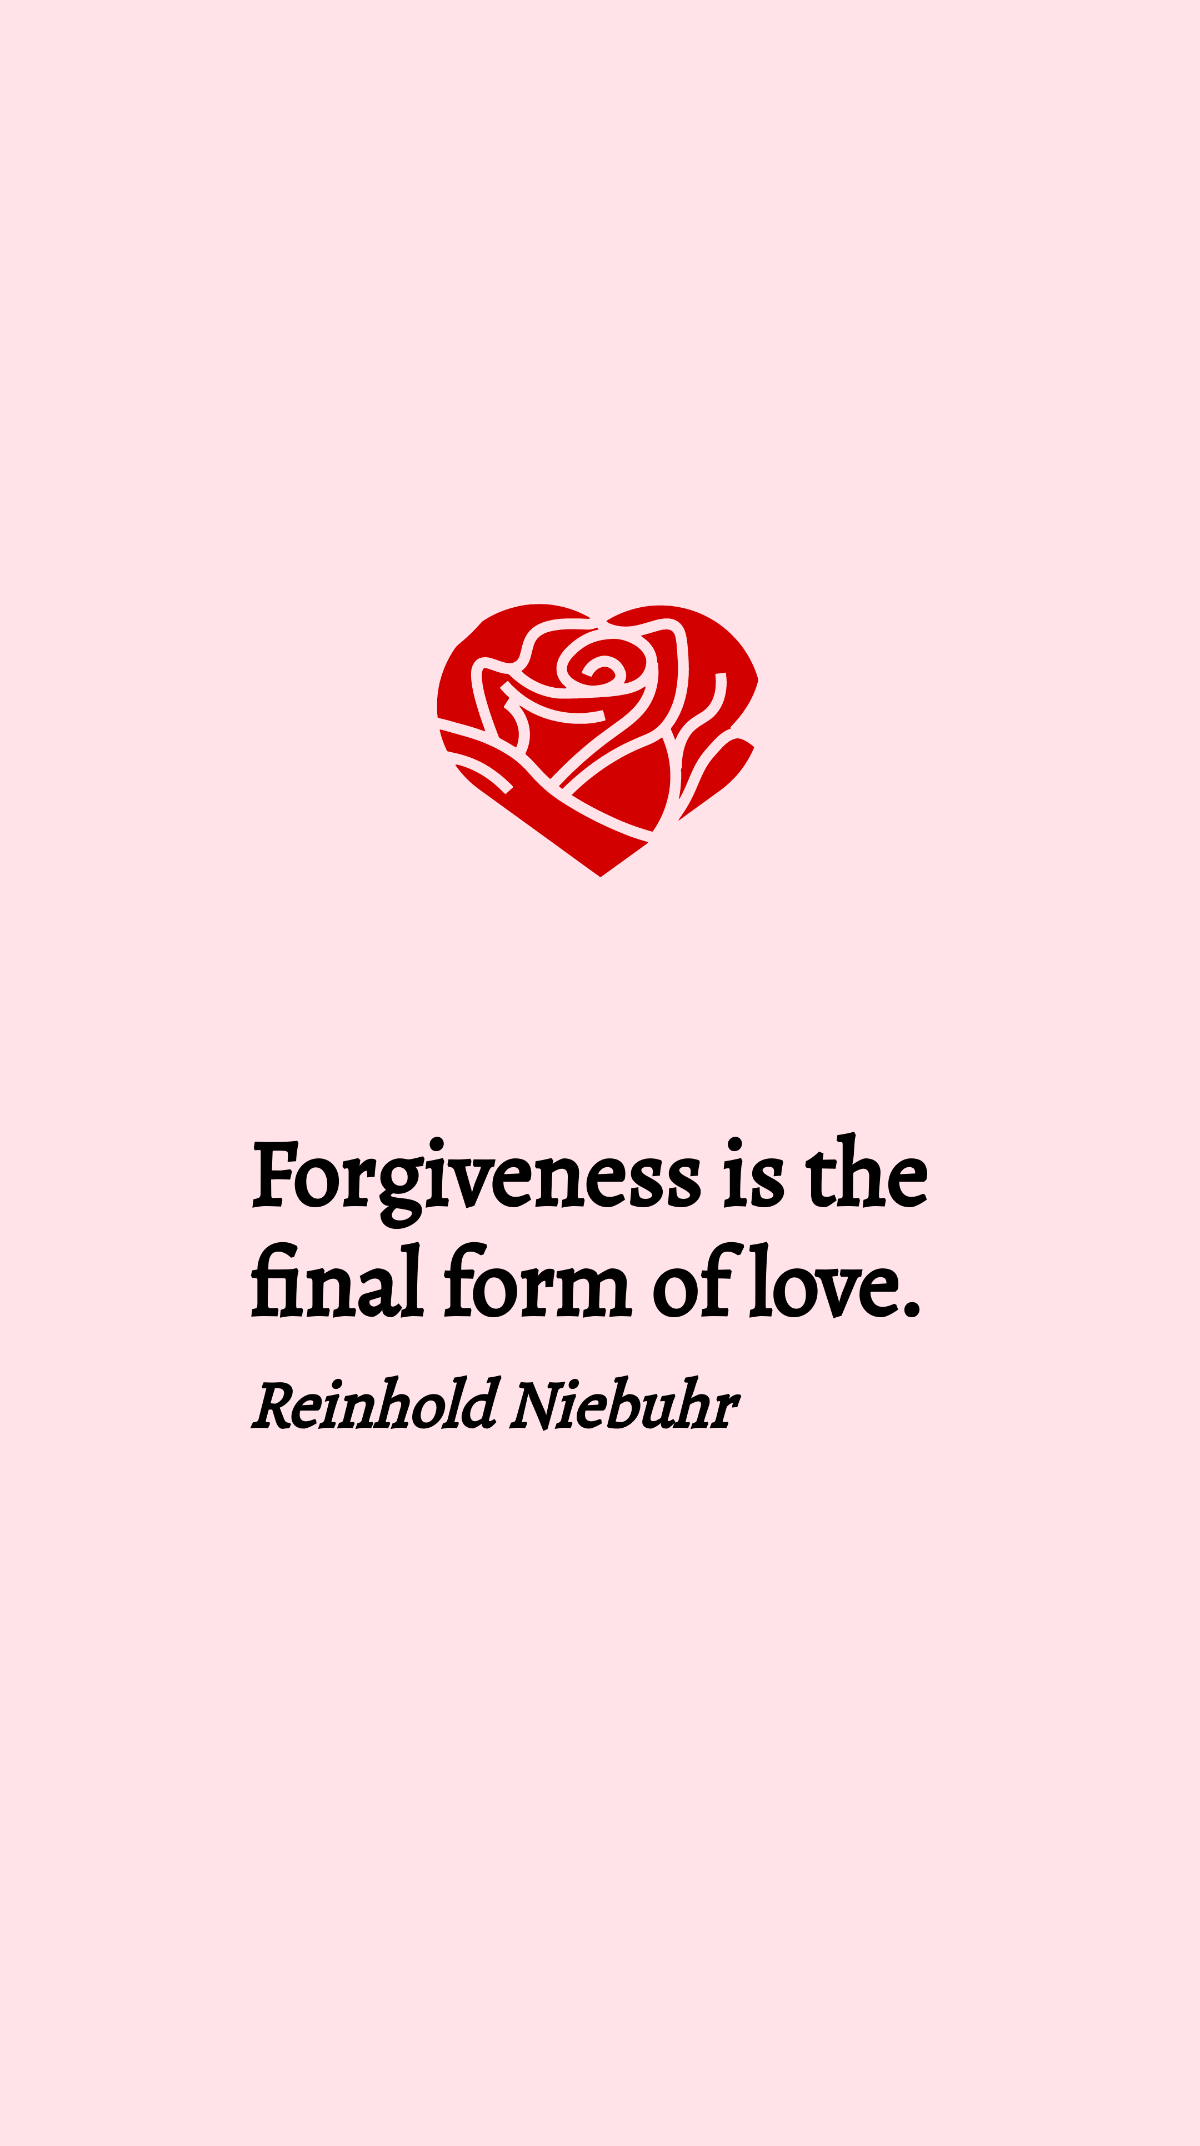 Reinhold Niebuhr - Forgiveness is the final form of love.